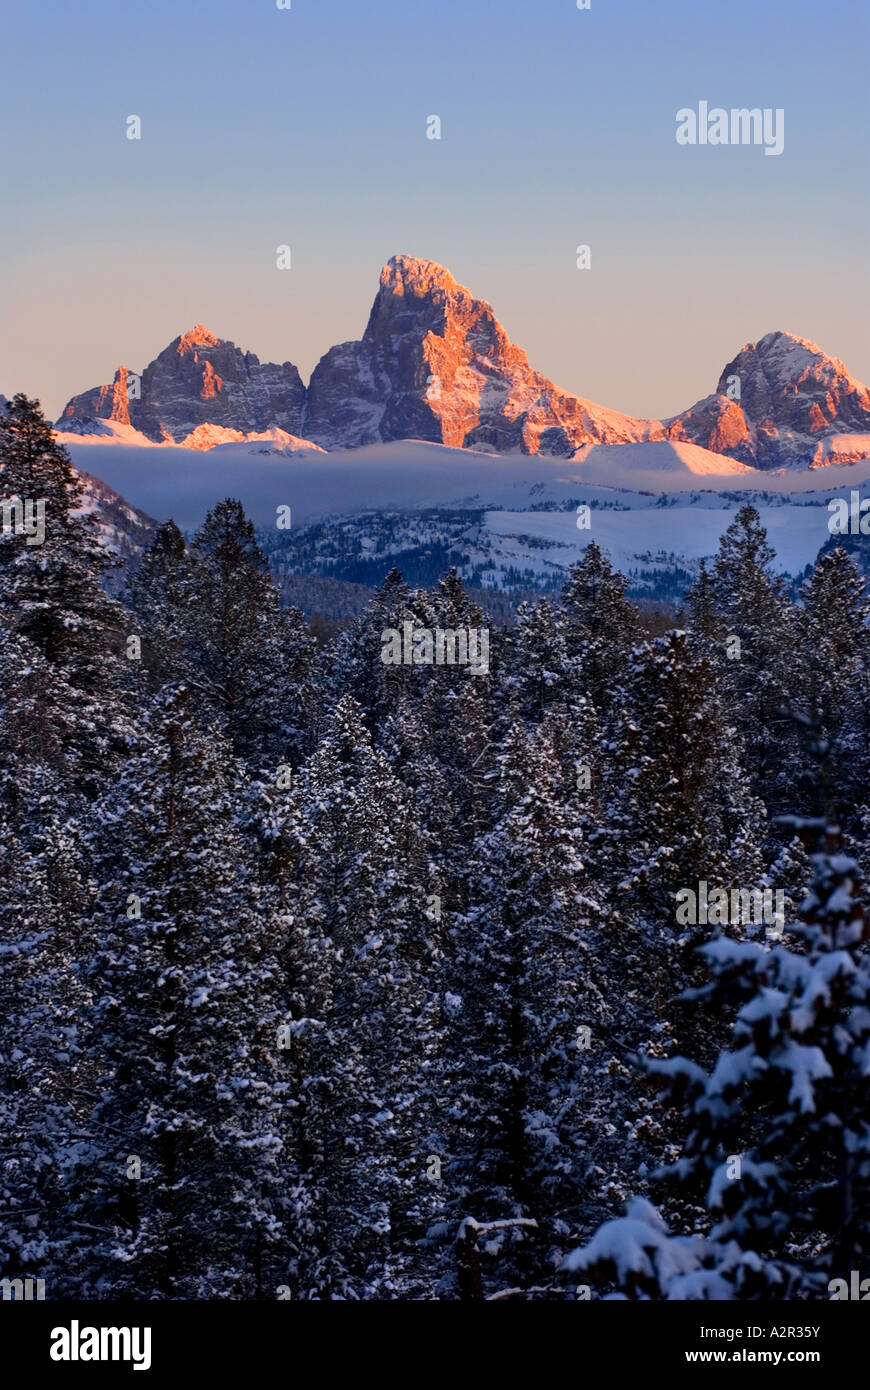 Idaho Driggs A colorful sunset on the majestic Teton Mountains in winter Stock Photo